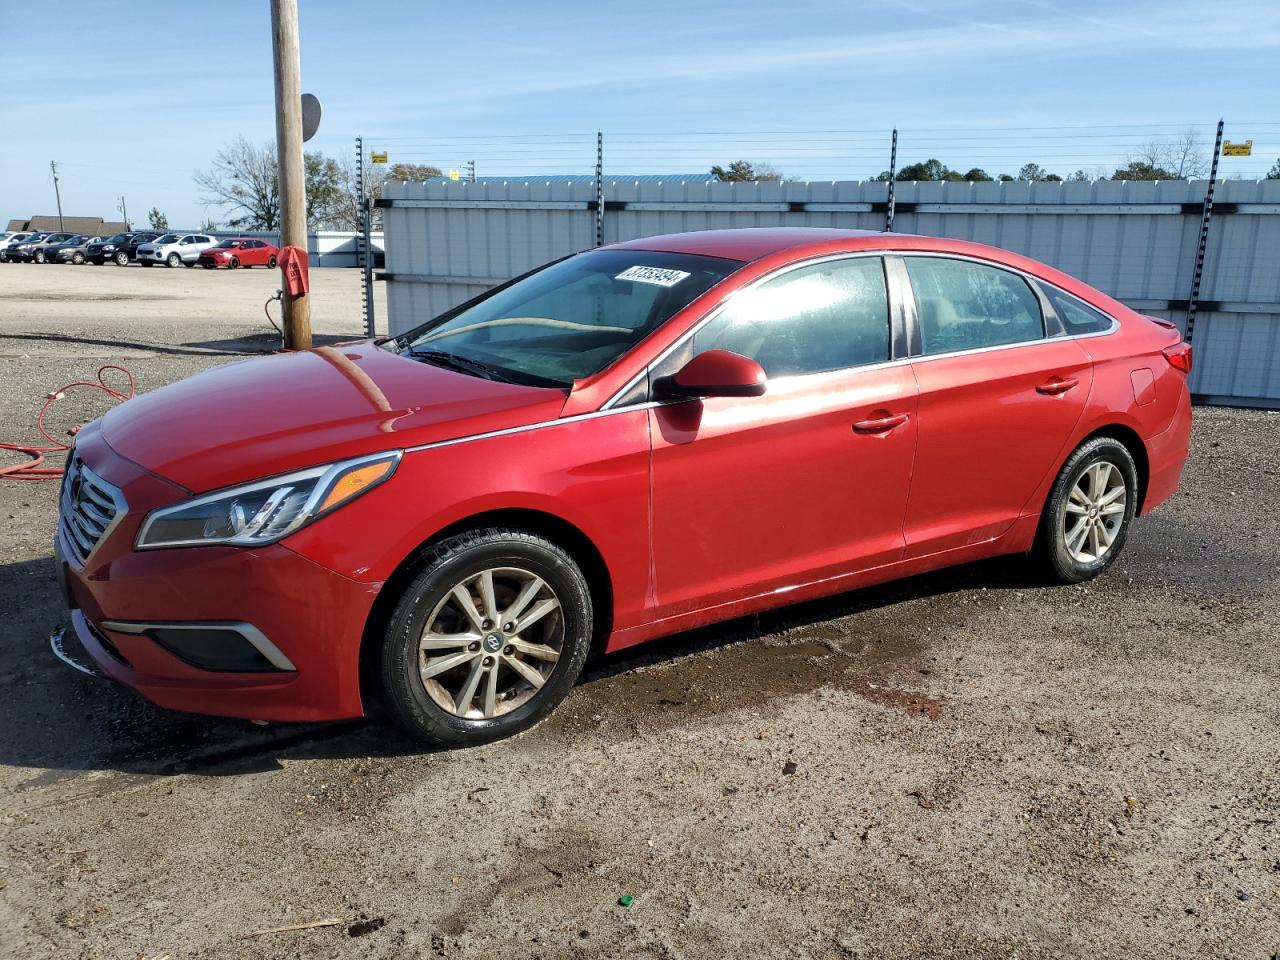 5NPE24AFXHH****** Salvage and Wrecked 2017 Hyundai Sonata in AL - Newton